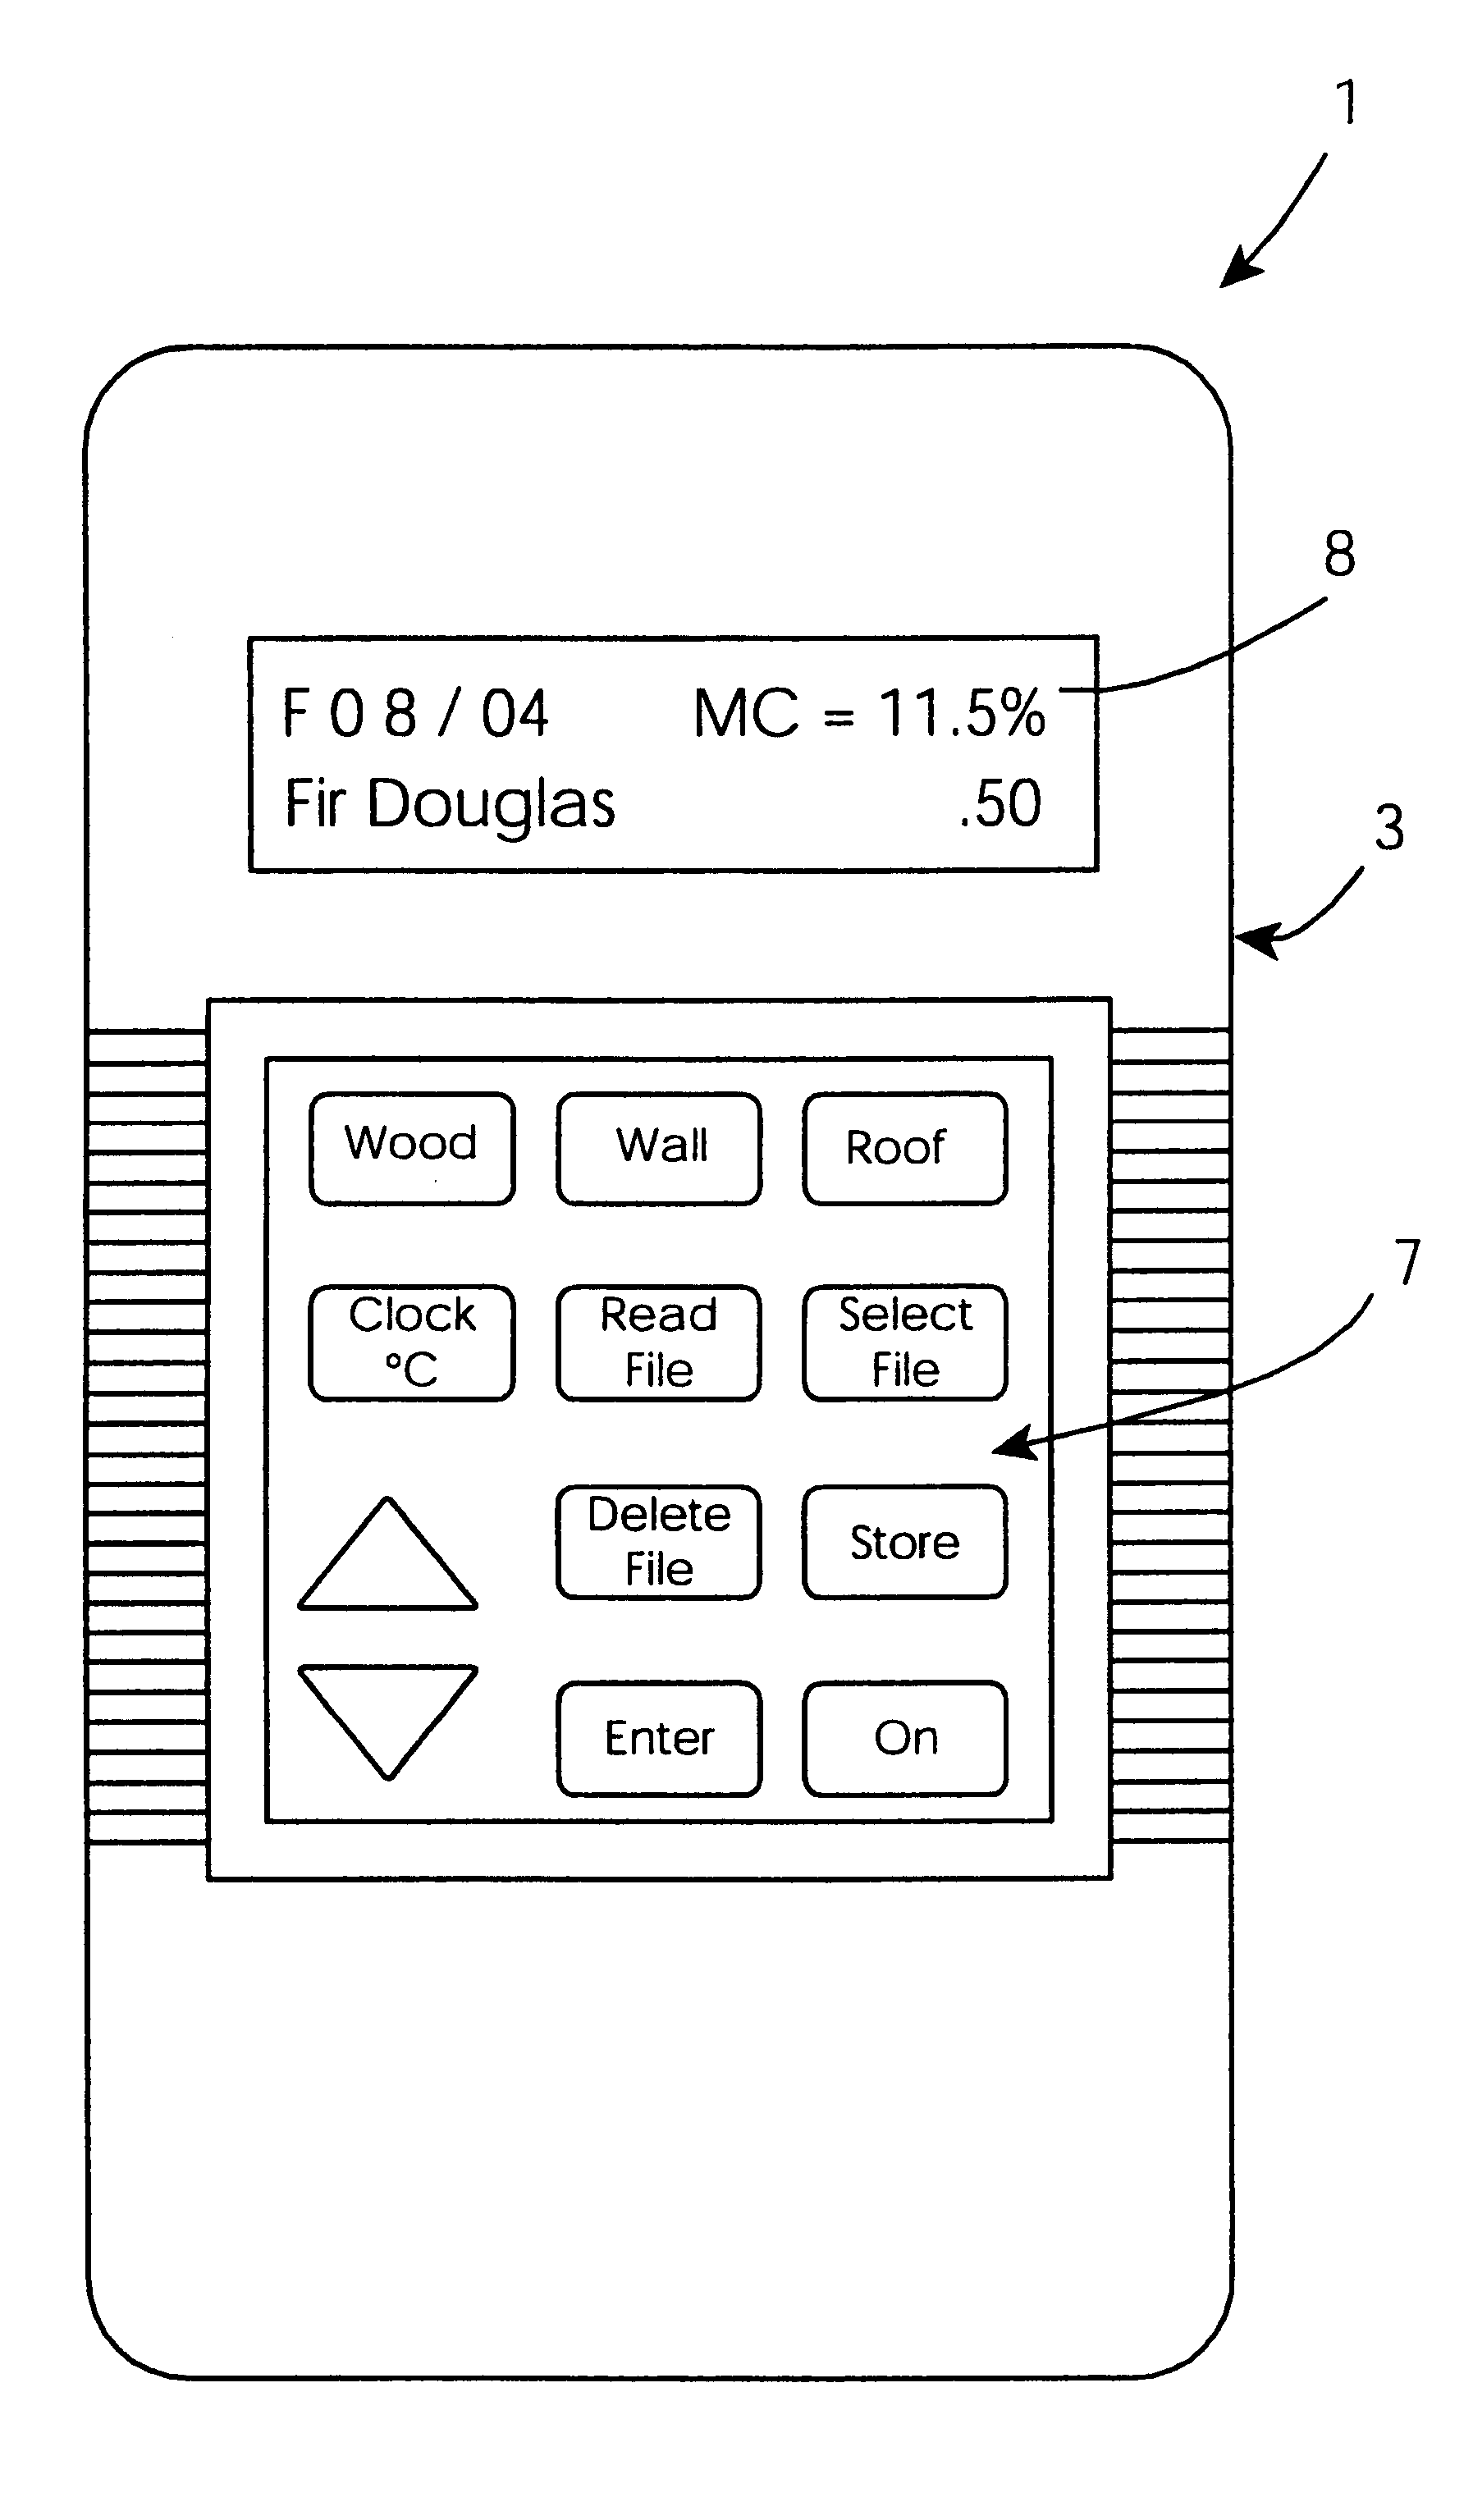 Hand-held digital moisture meter with memory and communications